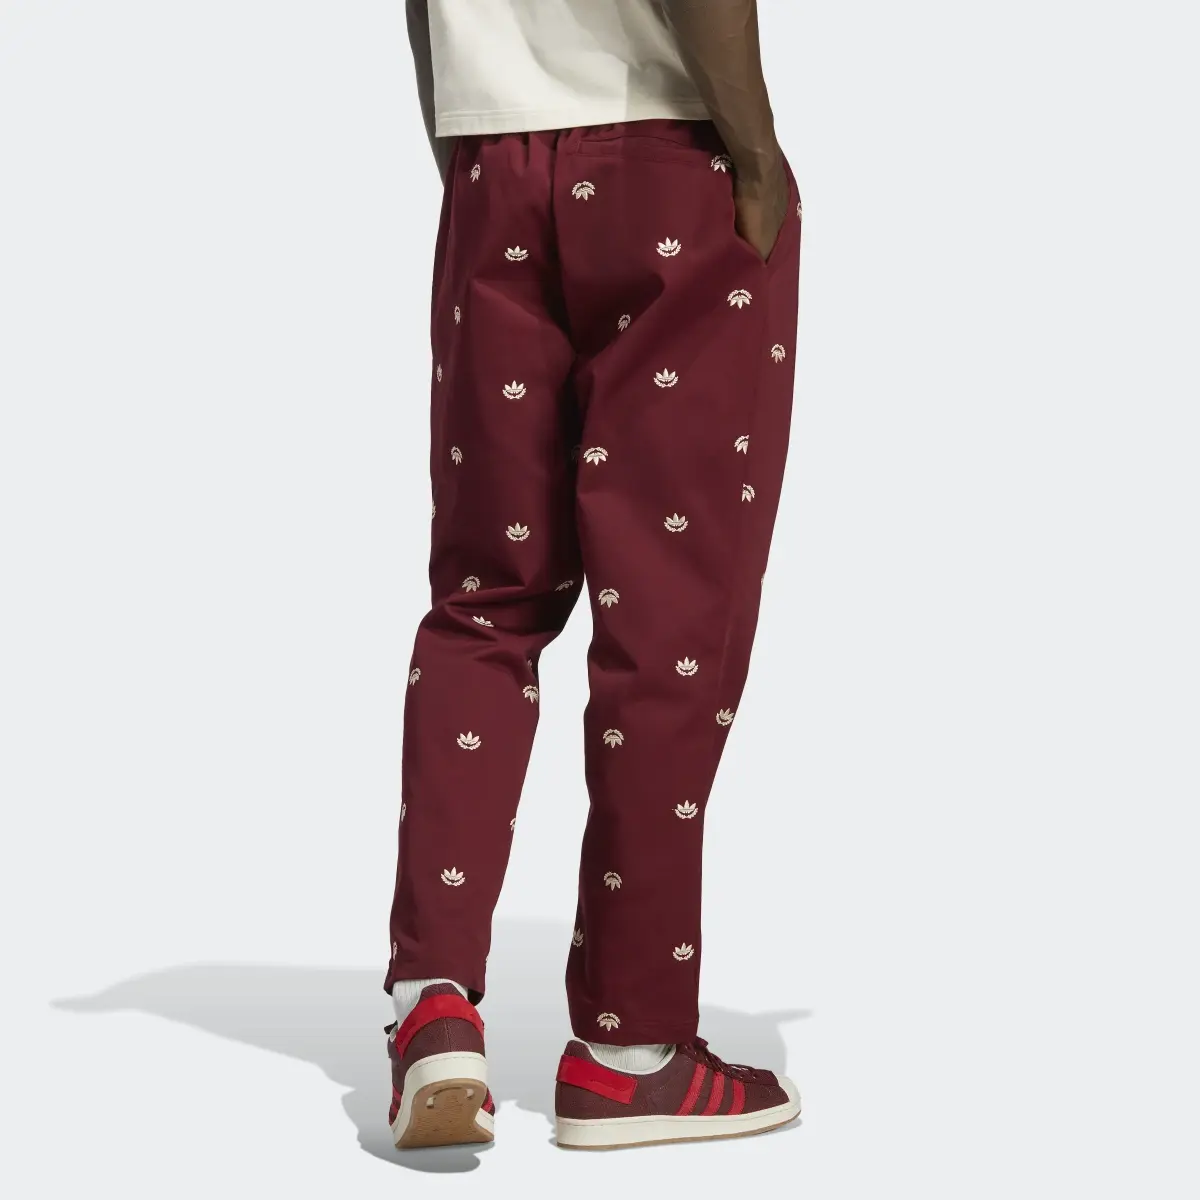 Adidas Graphics Archive Chino Trousers. 2